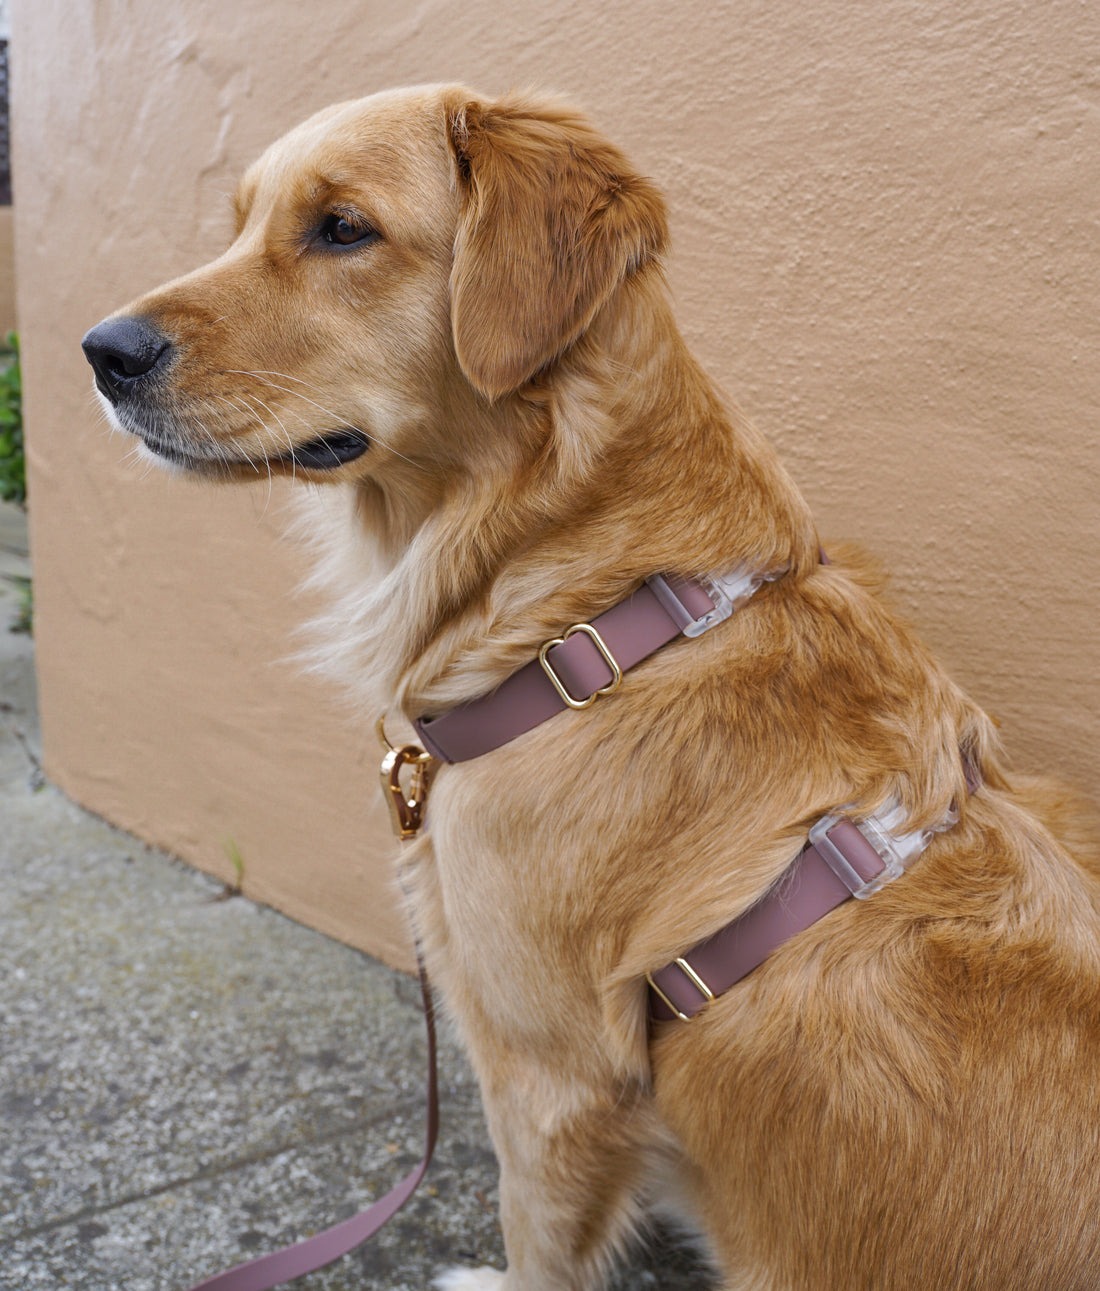 Espresso Brown Cloud Lite Dog Harness | Waterproof Dog Harness | No Pull Front Attachment | Available in 3 Sizes